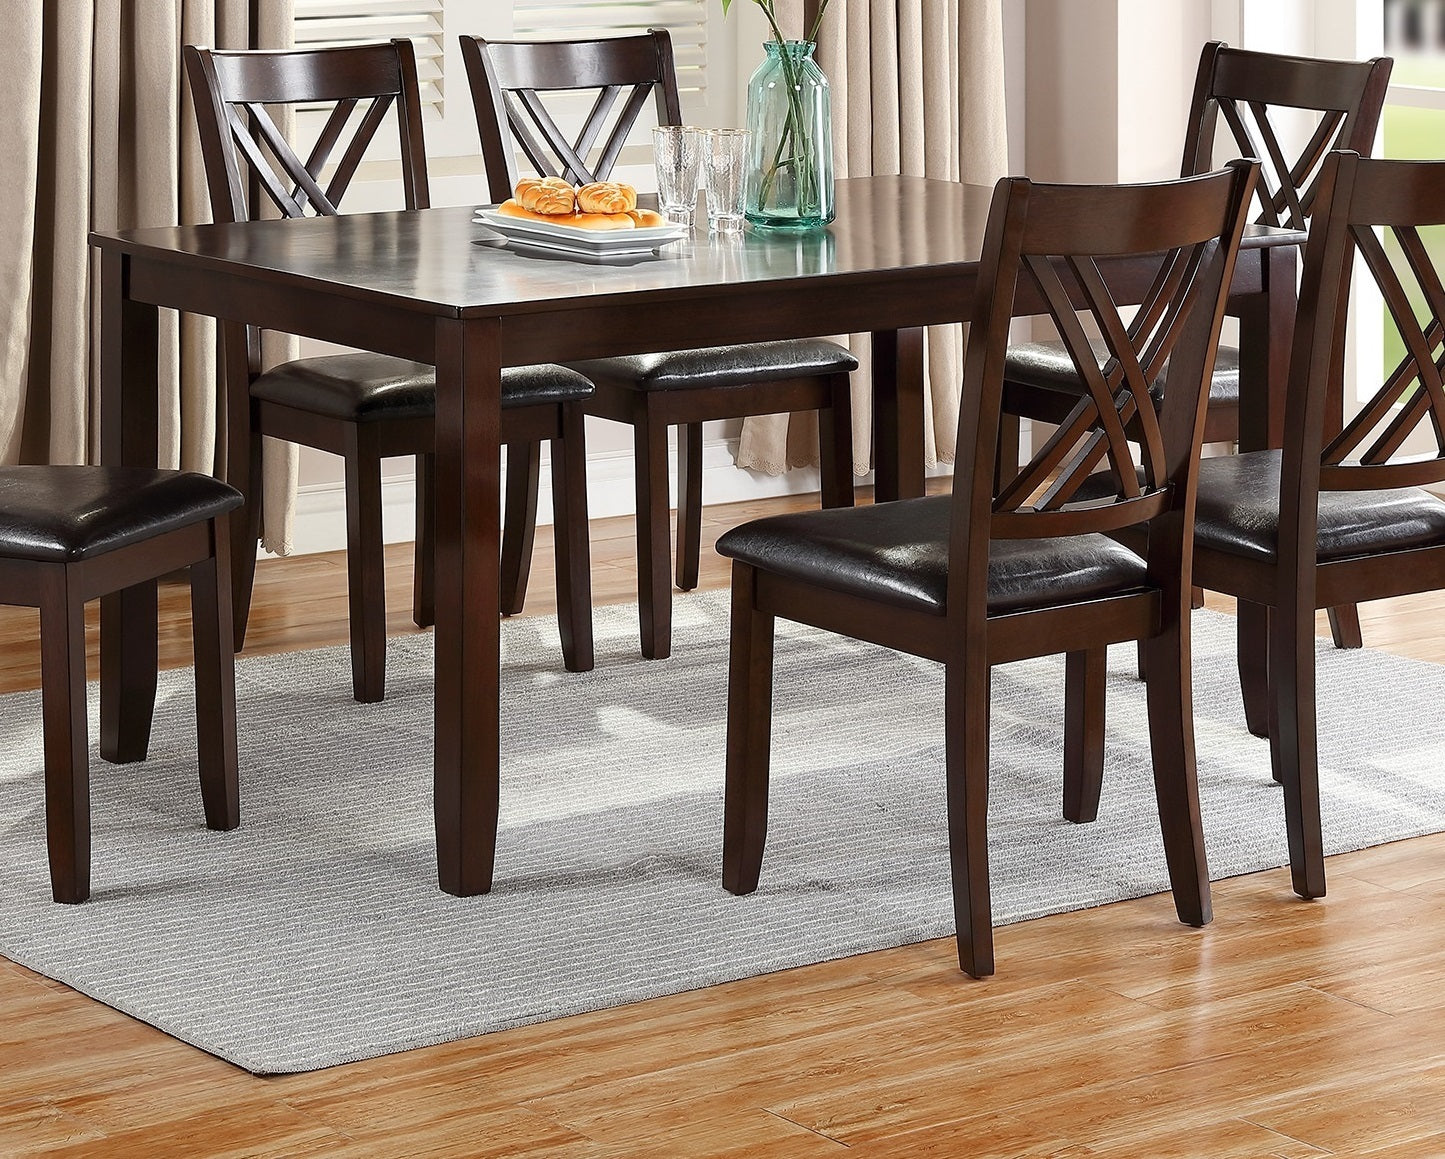 7pcs Dining Set Dining Table 6 Side Chairs Clean Espresso Finish Cushion Seats X Design back Chairs